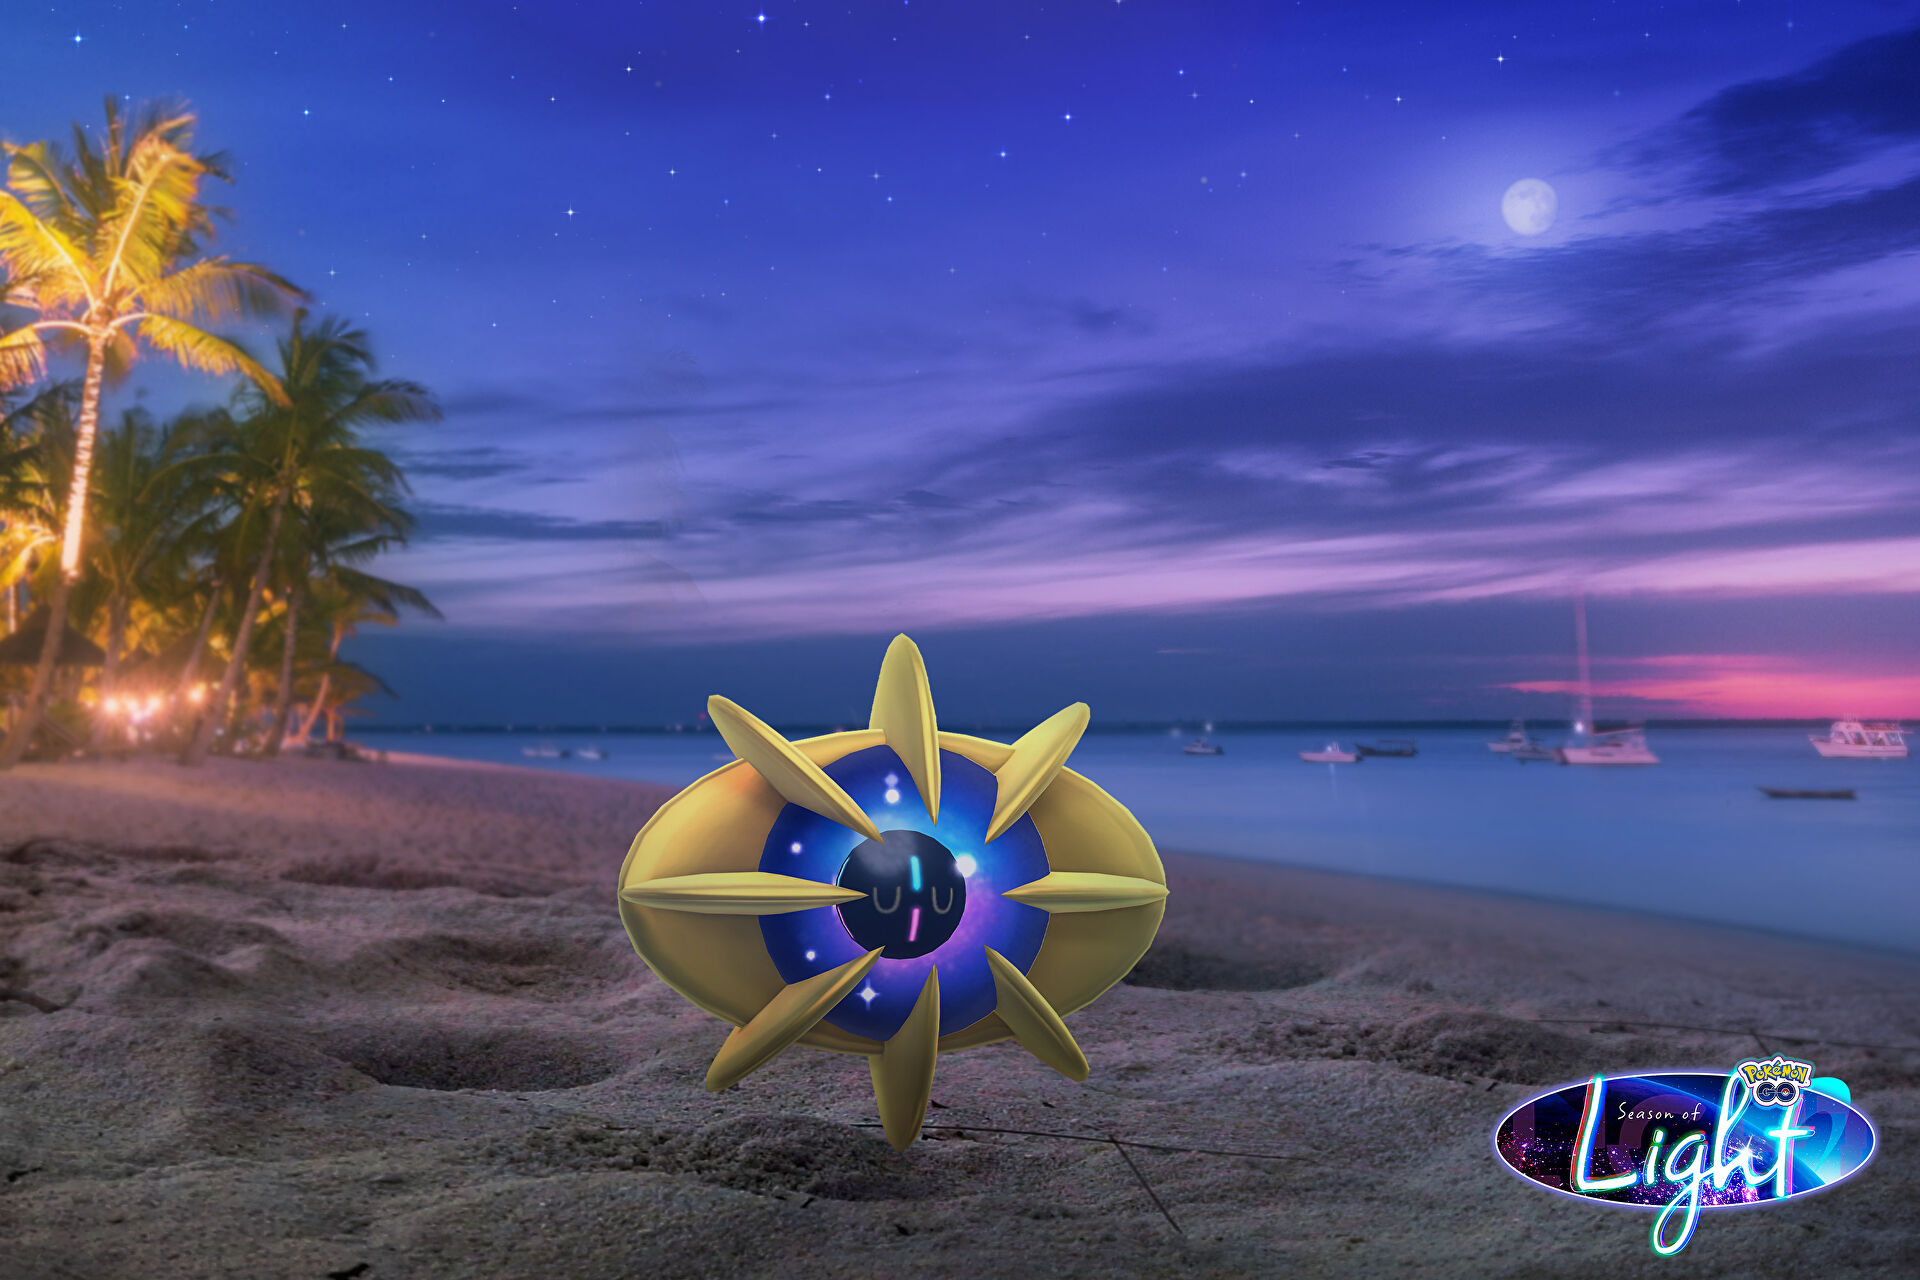 Pokemon Go’s Evolving Stars event will see the debut of Cosmoem